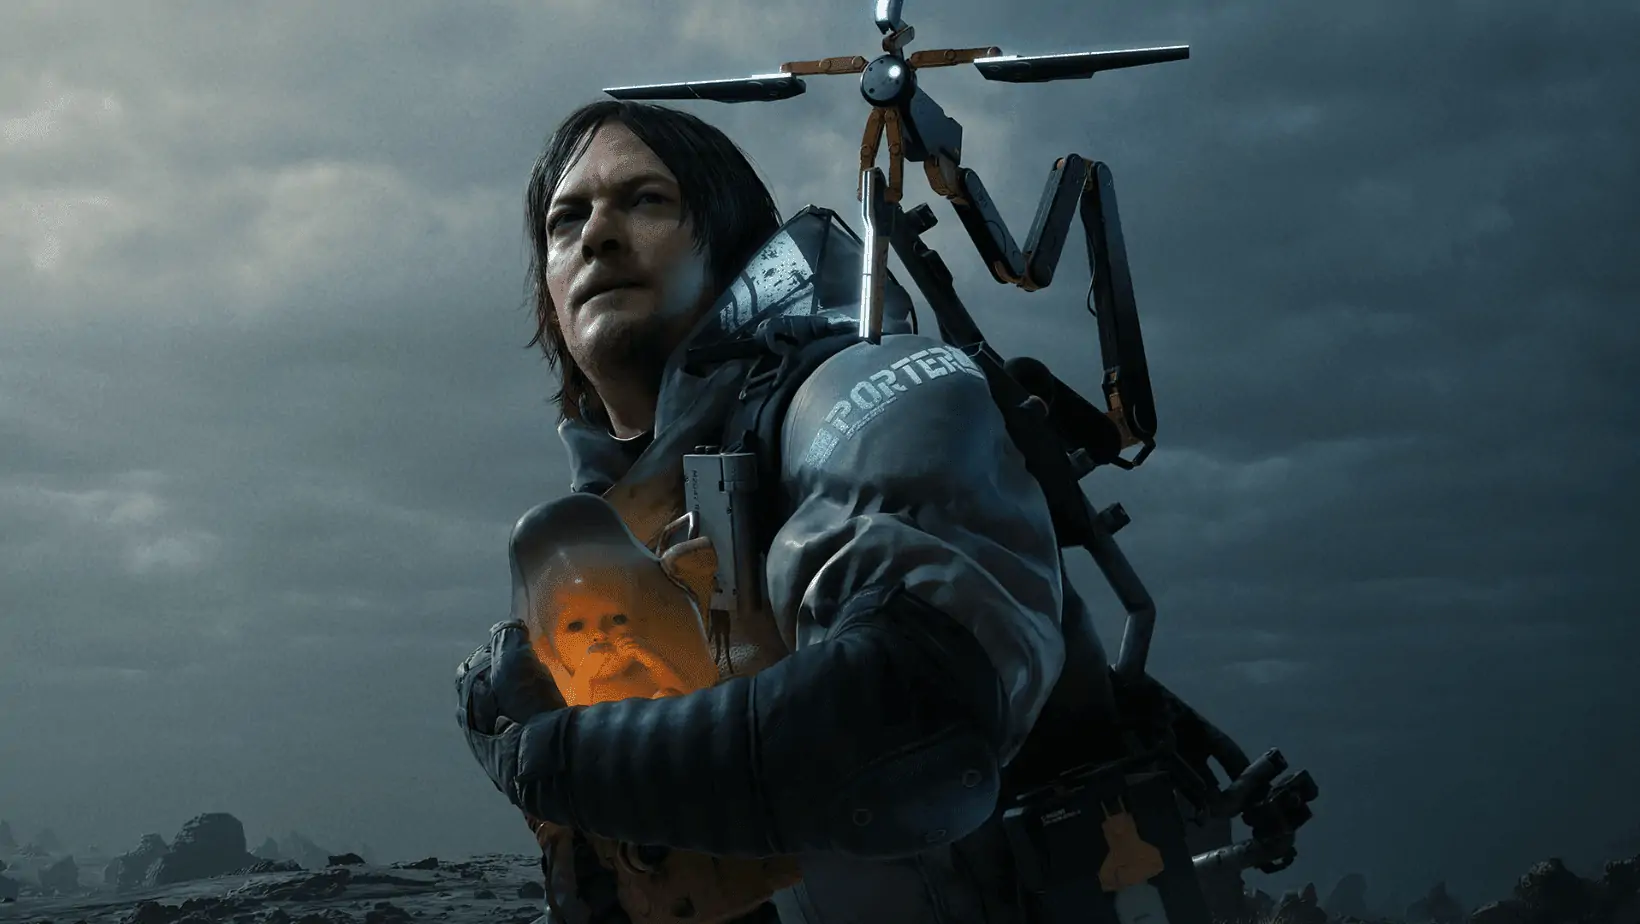 Death Stranding Director’s Cut Coming to Apple Devices: A Gaming Breakthrough